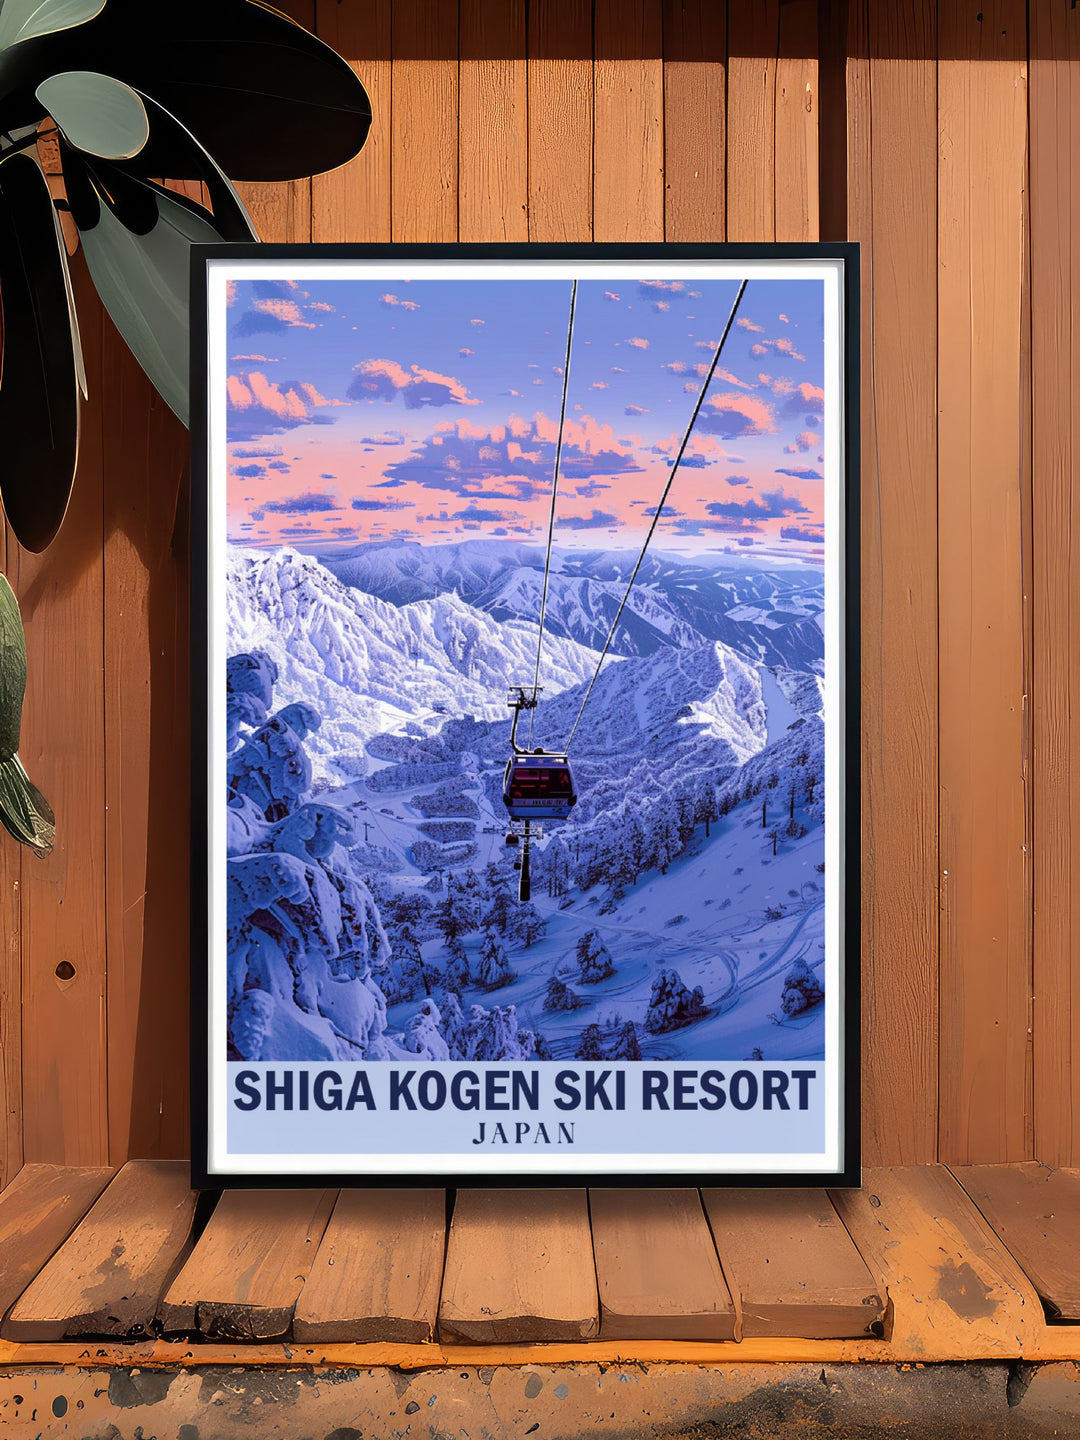 Featuring the majestic Japanese Alps, this poster showcases the serene vistas and awe inspiring peaks that define Nagano, Japan, inviting viewers to explore the natural beauty of this alpine region.